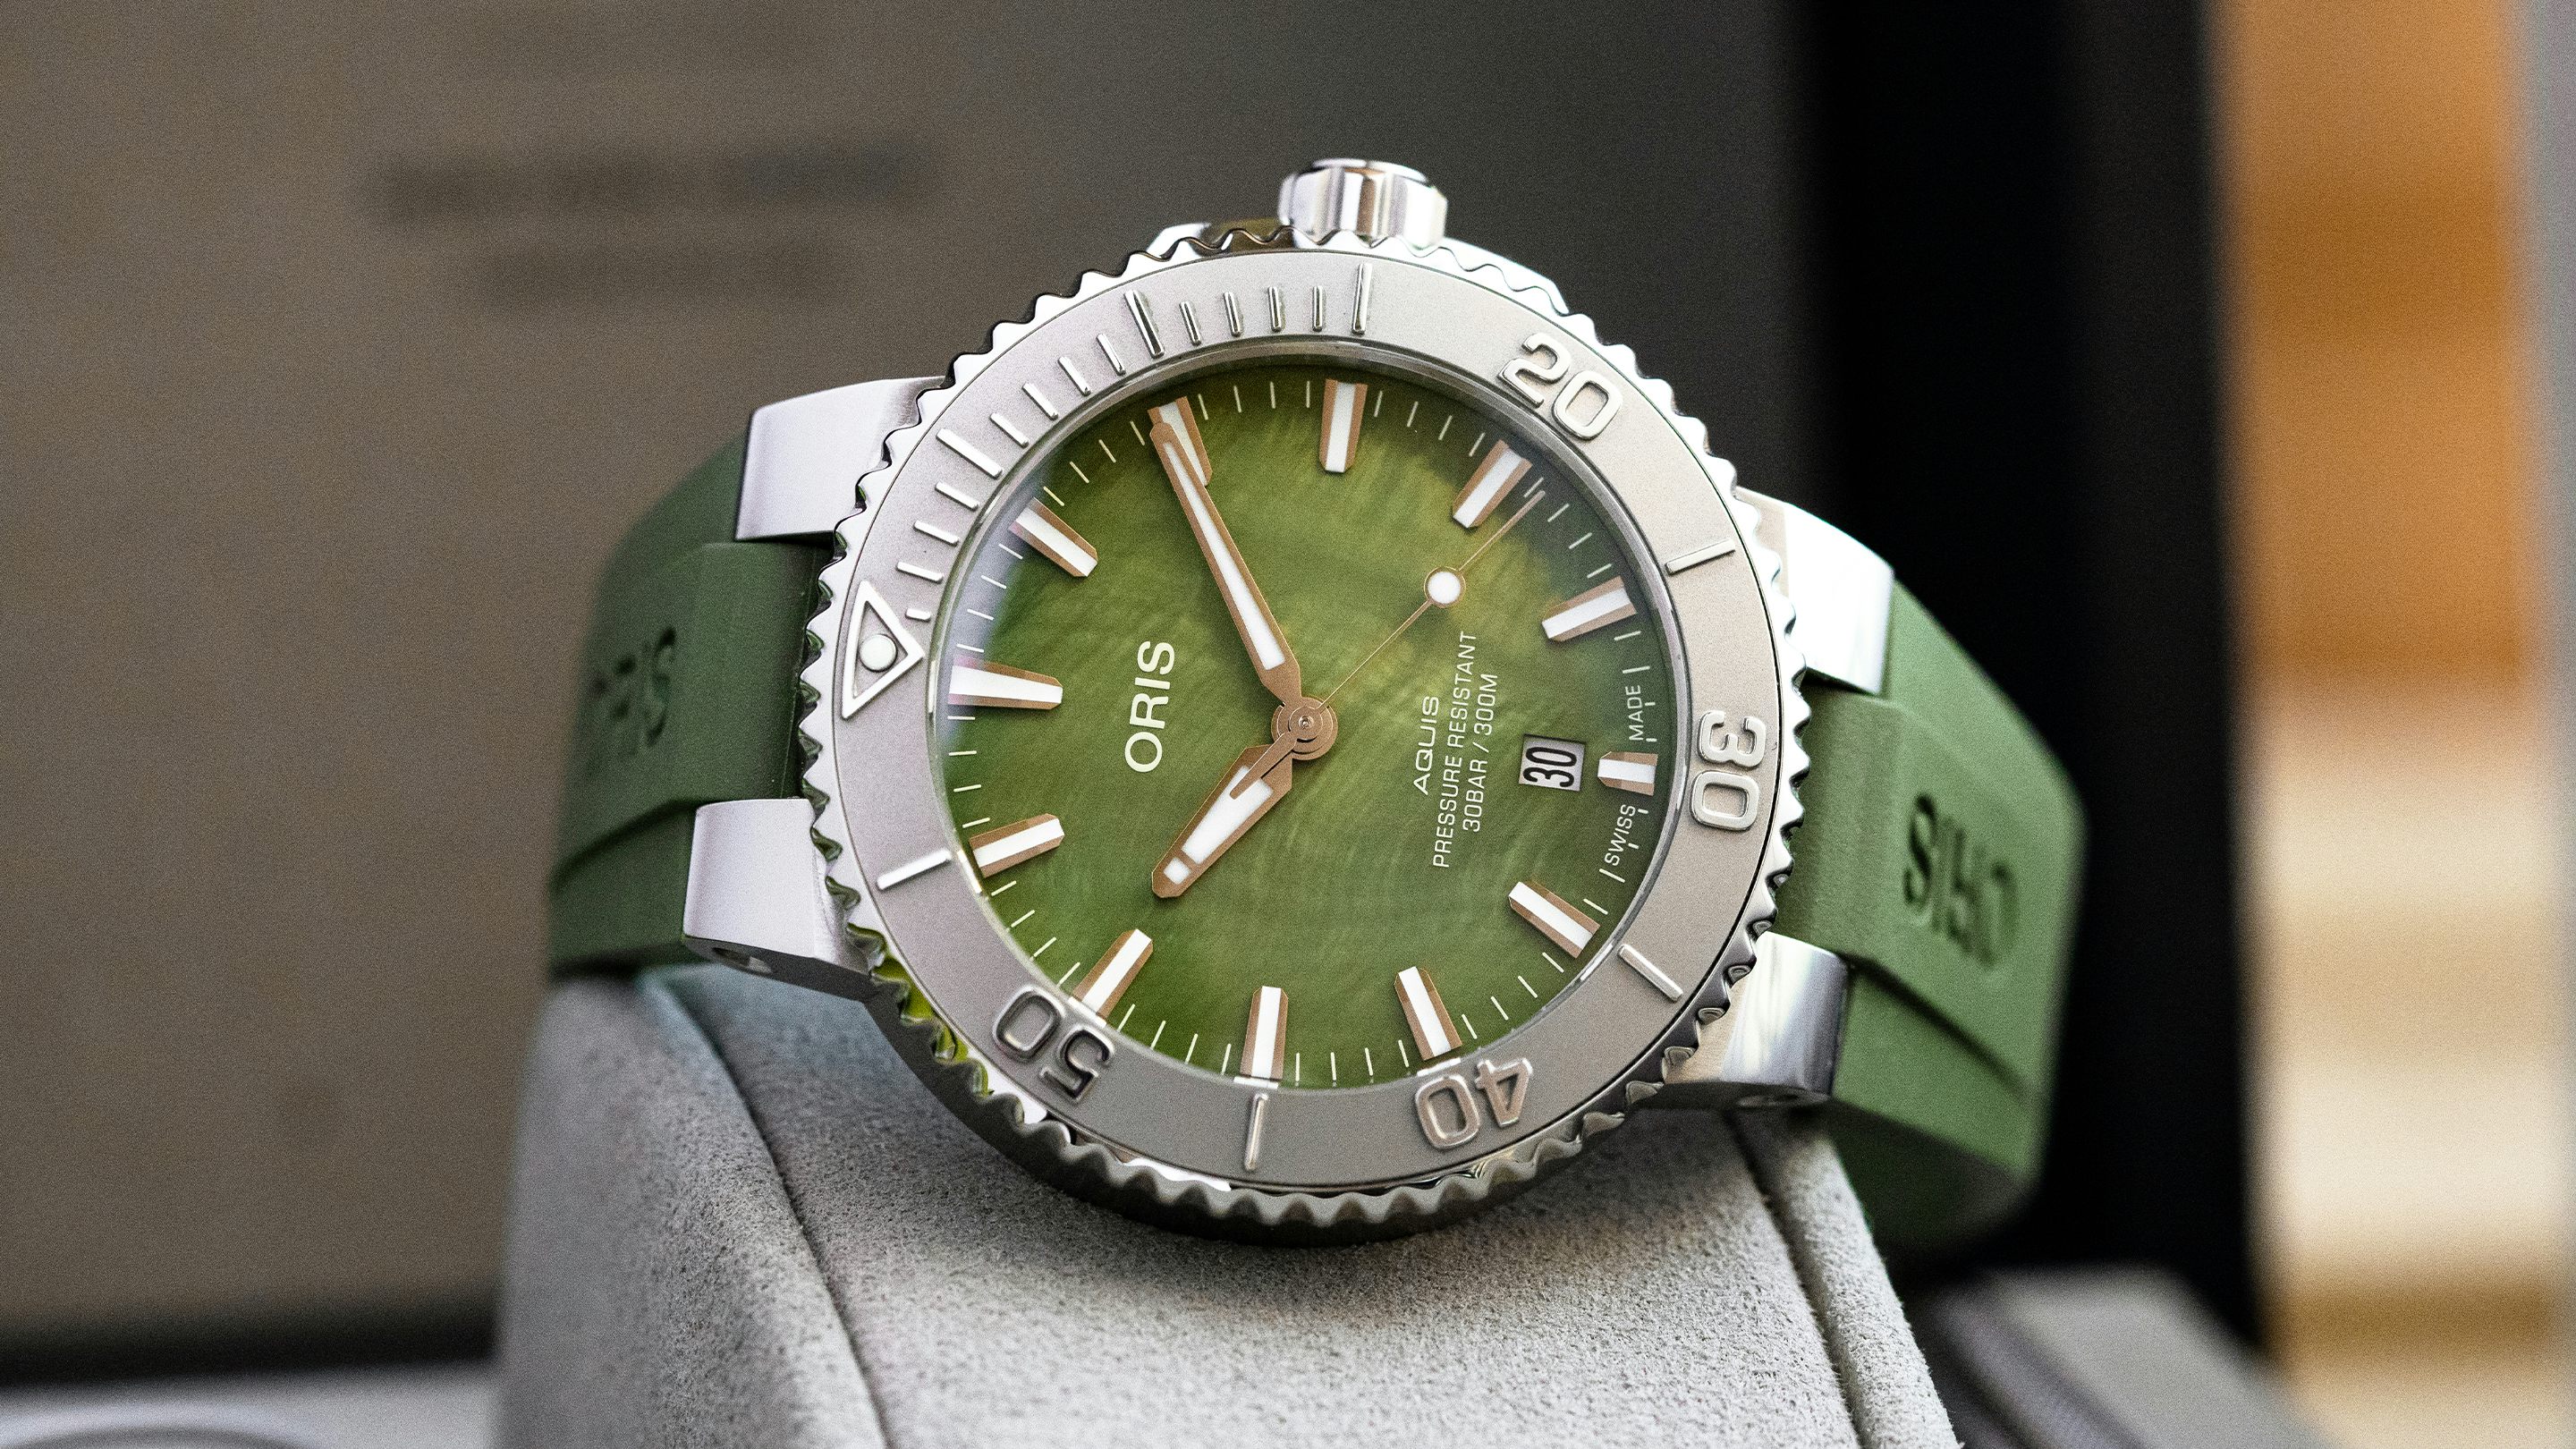 Polar Programare A rade  A Hands-On Review Of The Oris Aquis NY Harbor Limited Edition